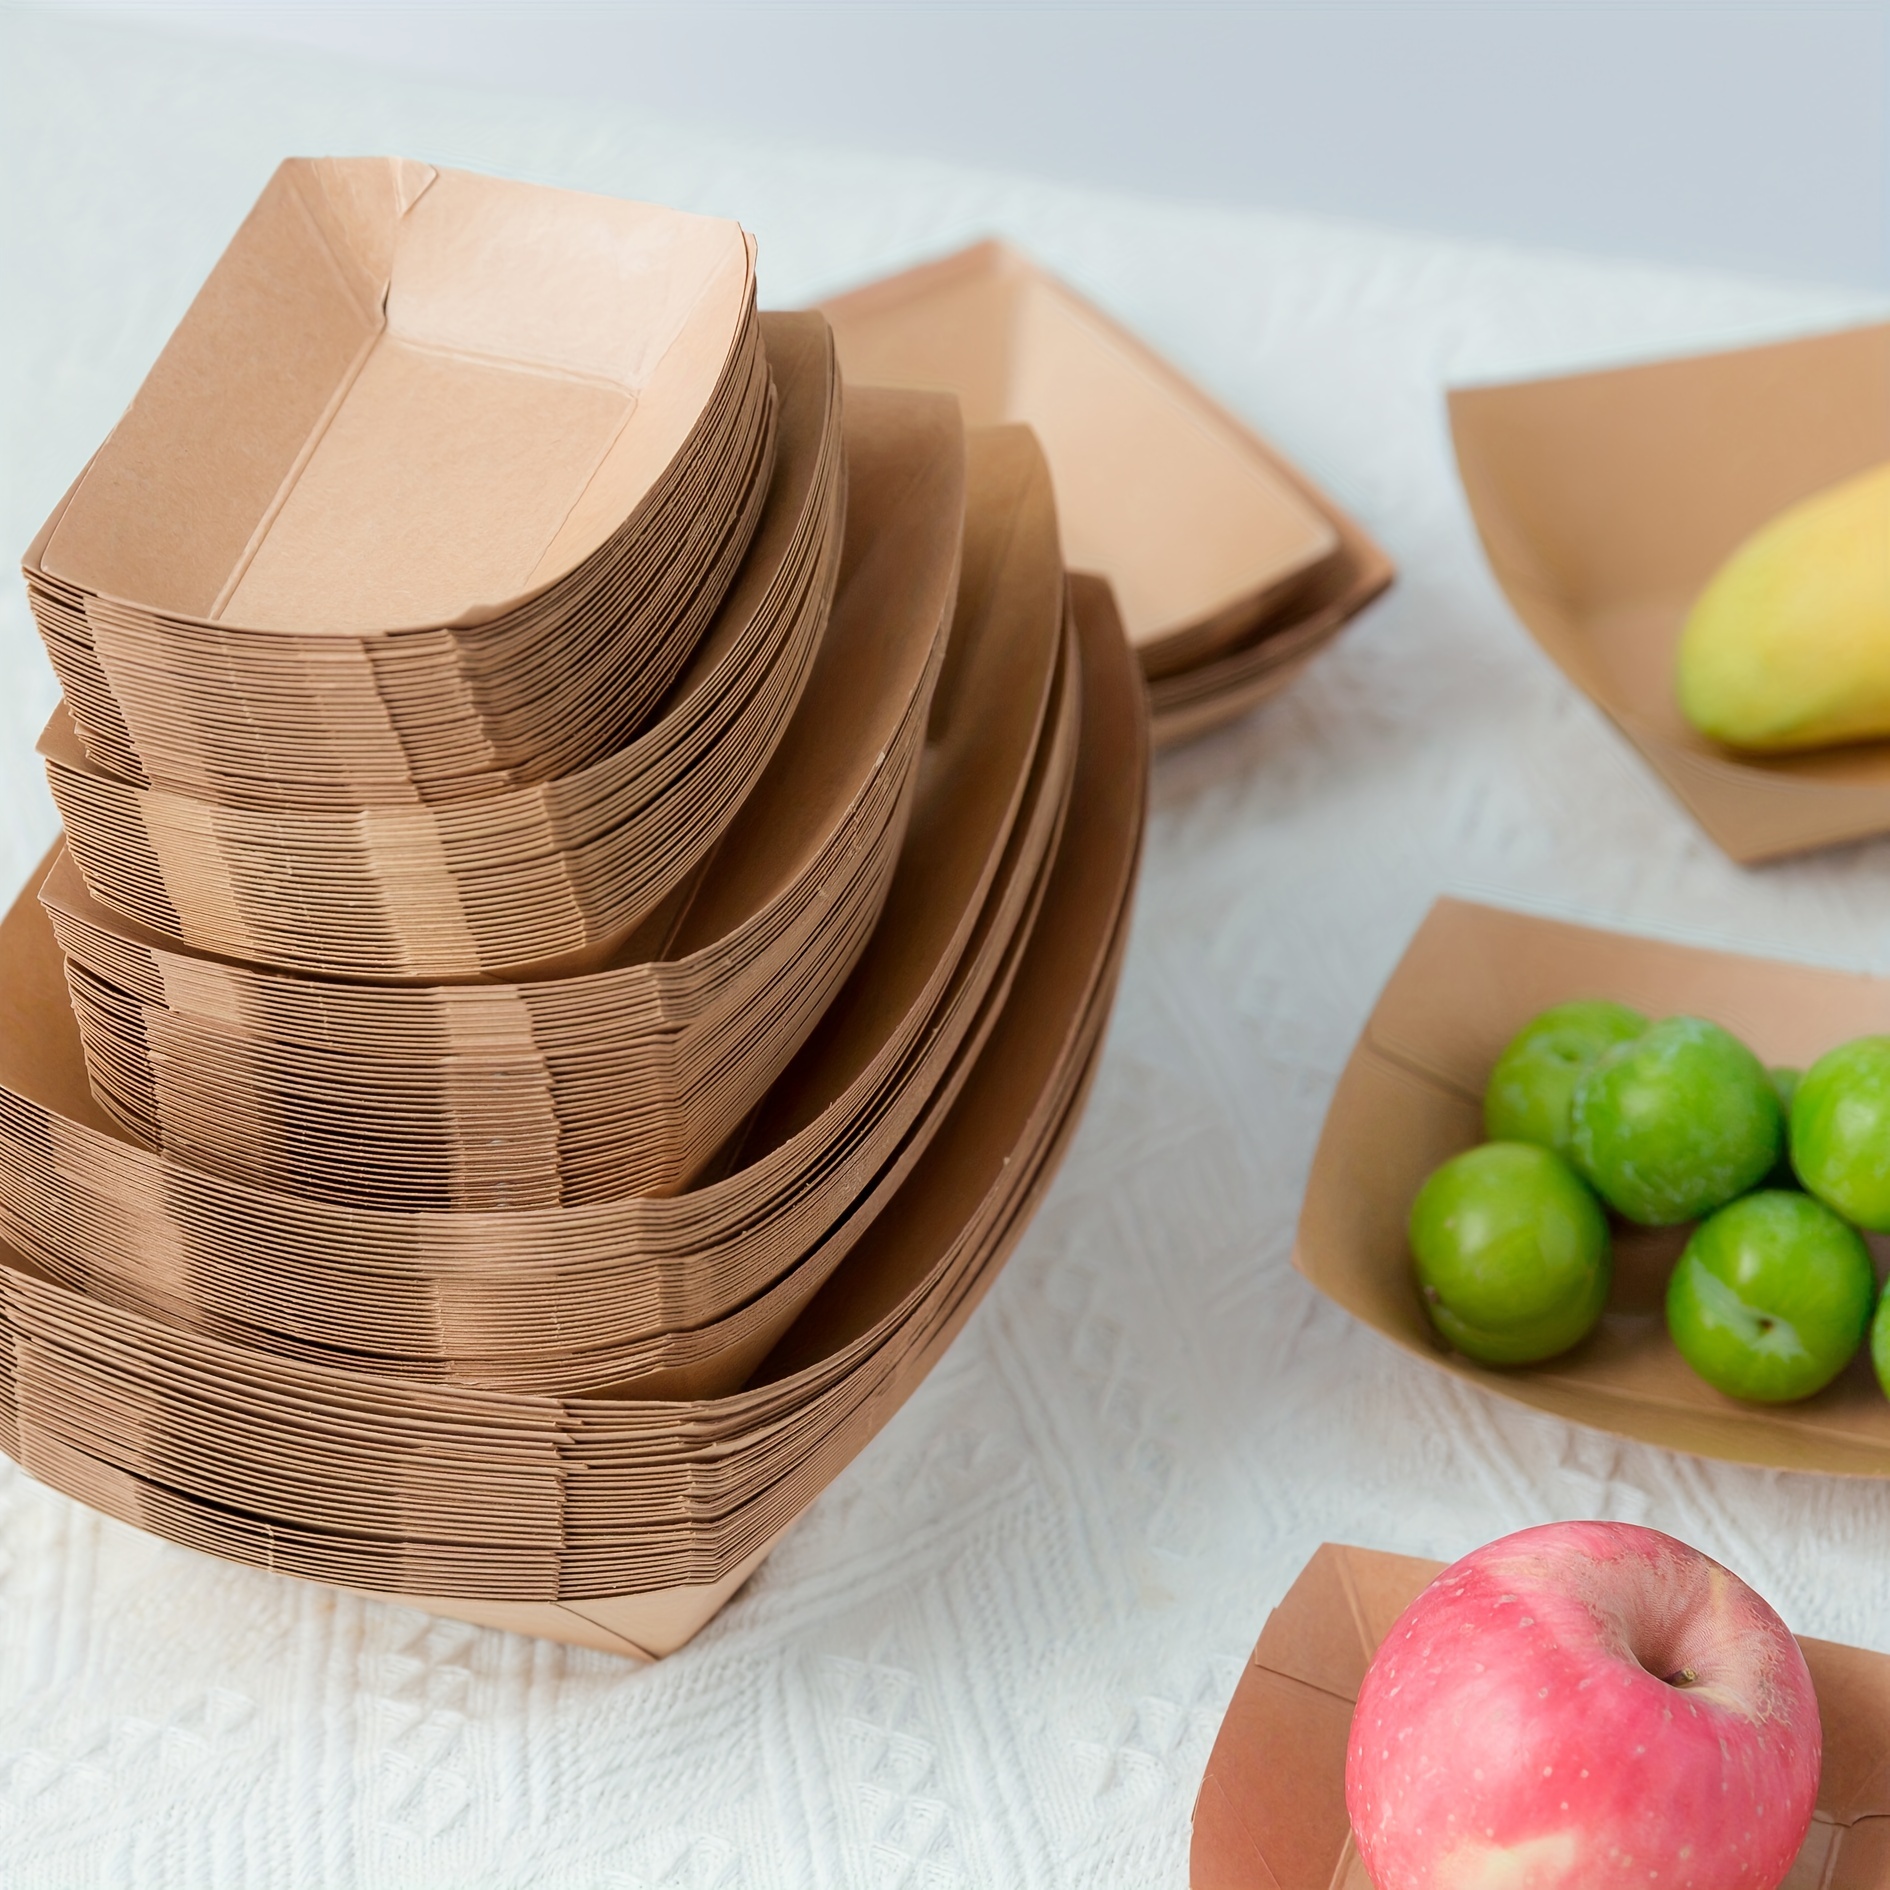 

50pcs Disposable Kraft Paper Food Trays, Built-in Film Not Easy To Leak, Various Specifications, Perfect For Hot Dogs, Fried Food, Lamb Skewers, Fast Food Paperboard Boat Basket For Parties